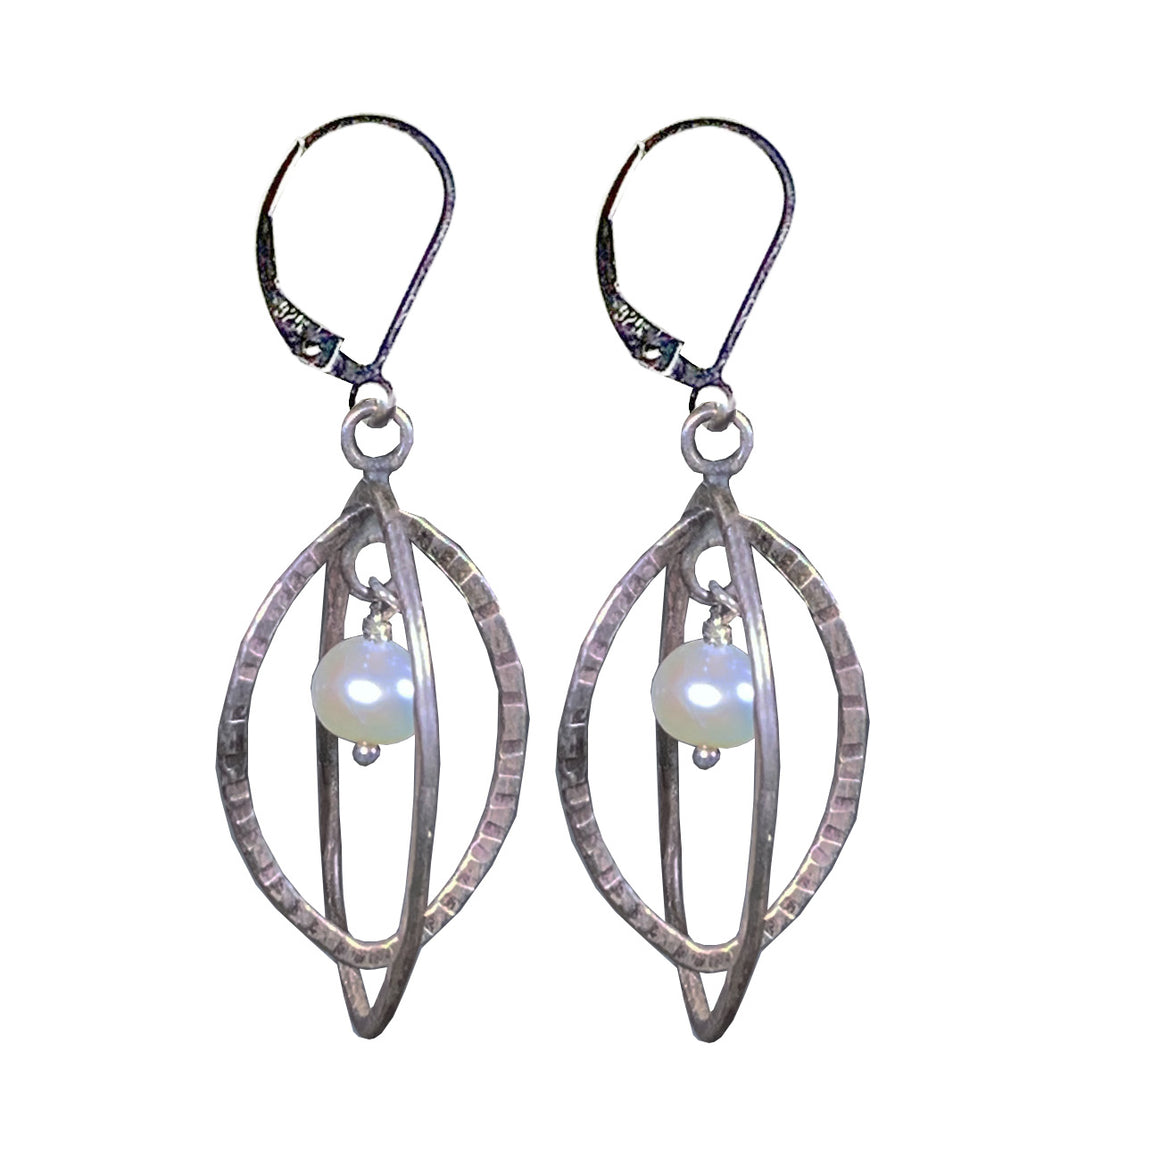 Etched Hammered Sterling Cage Earrings With Pearls